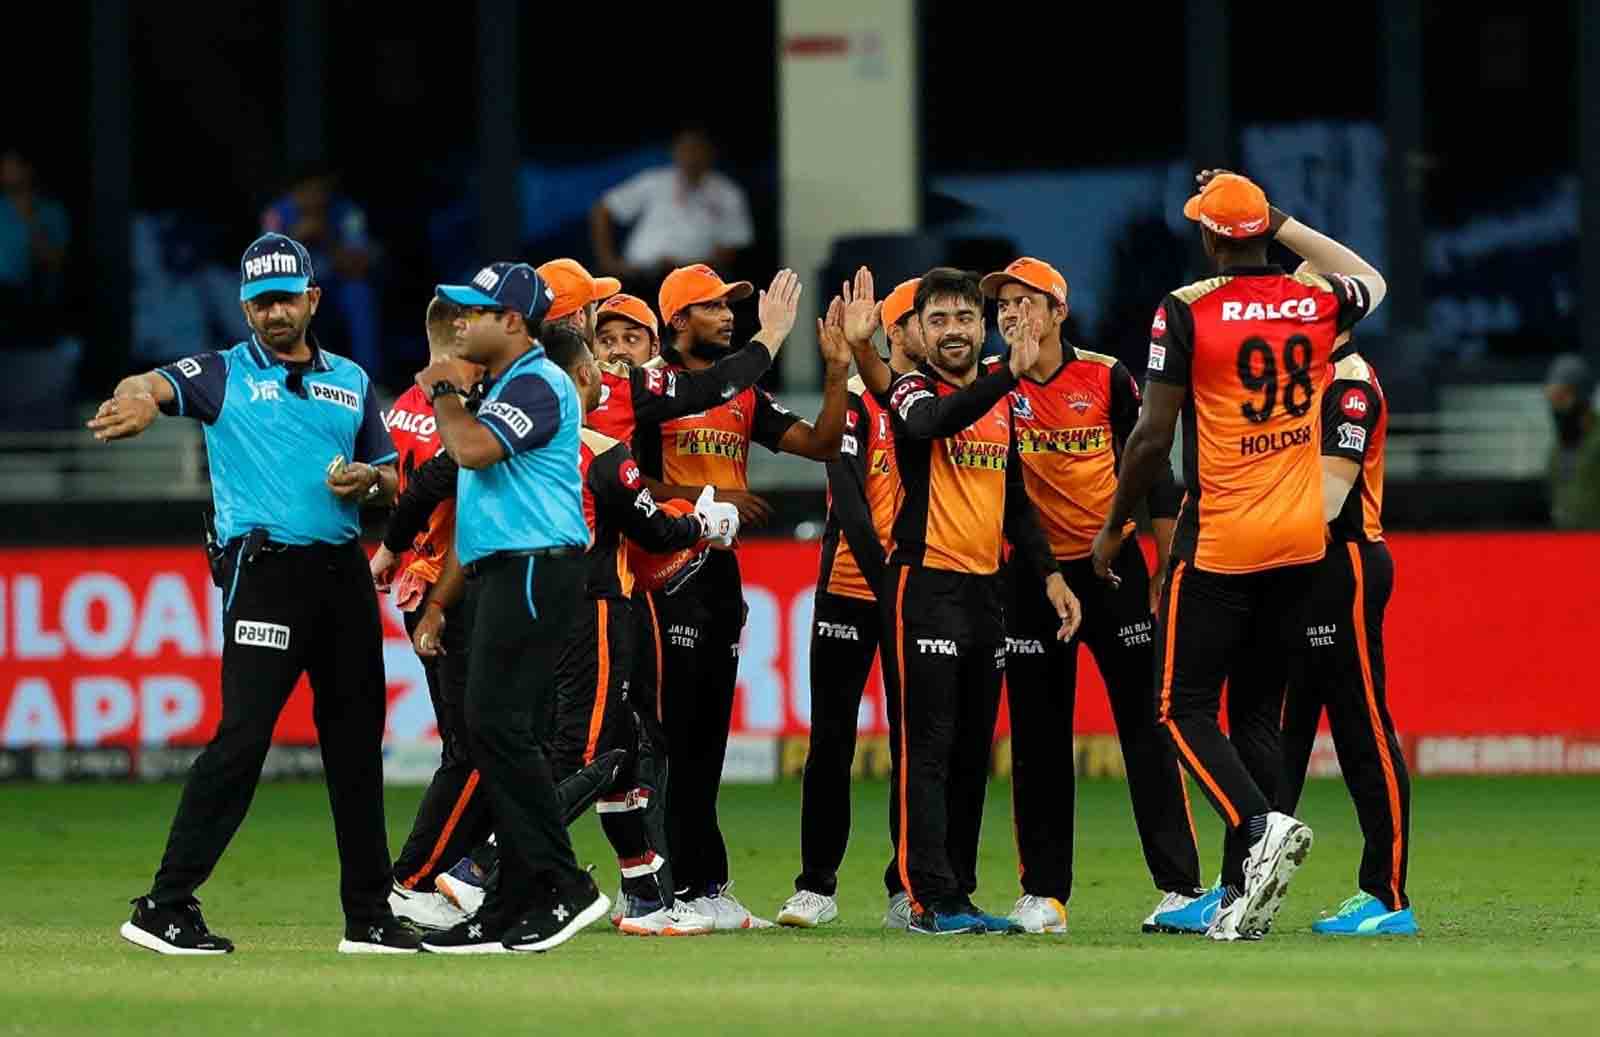 IPL 2020: Umpire Anil Chaudhary Sparks Controversy For Influencing DRS Call During SRH vs DC Match